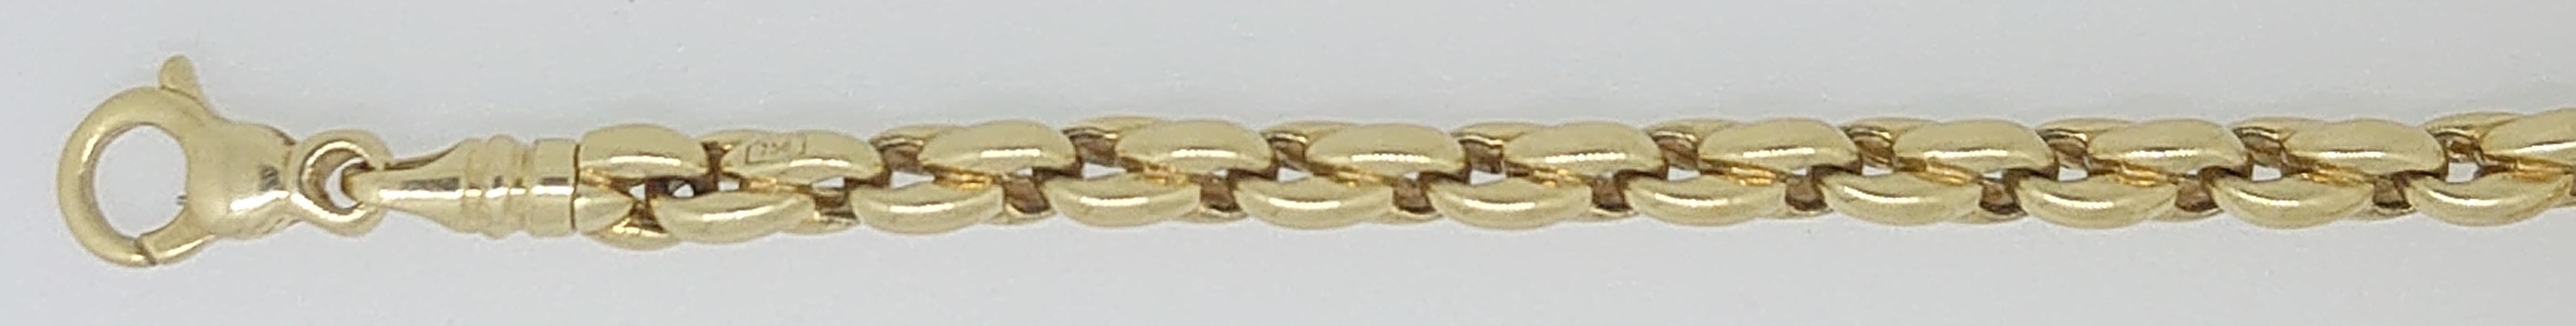 Collier Anker oval Gelbgold 750, ca. 4.2mm, 45cm